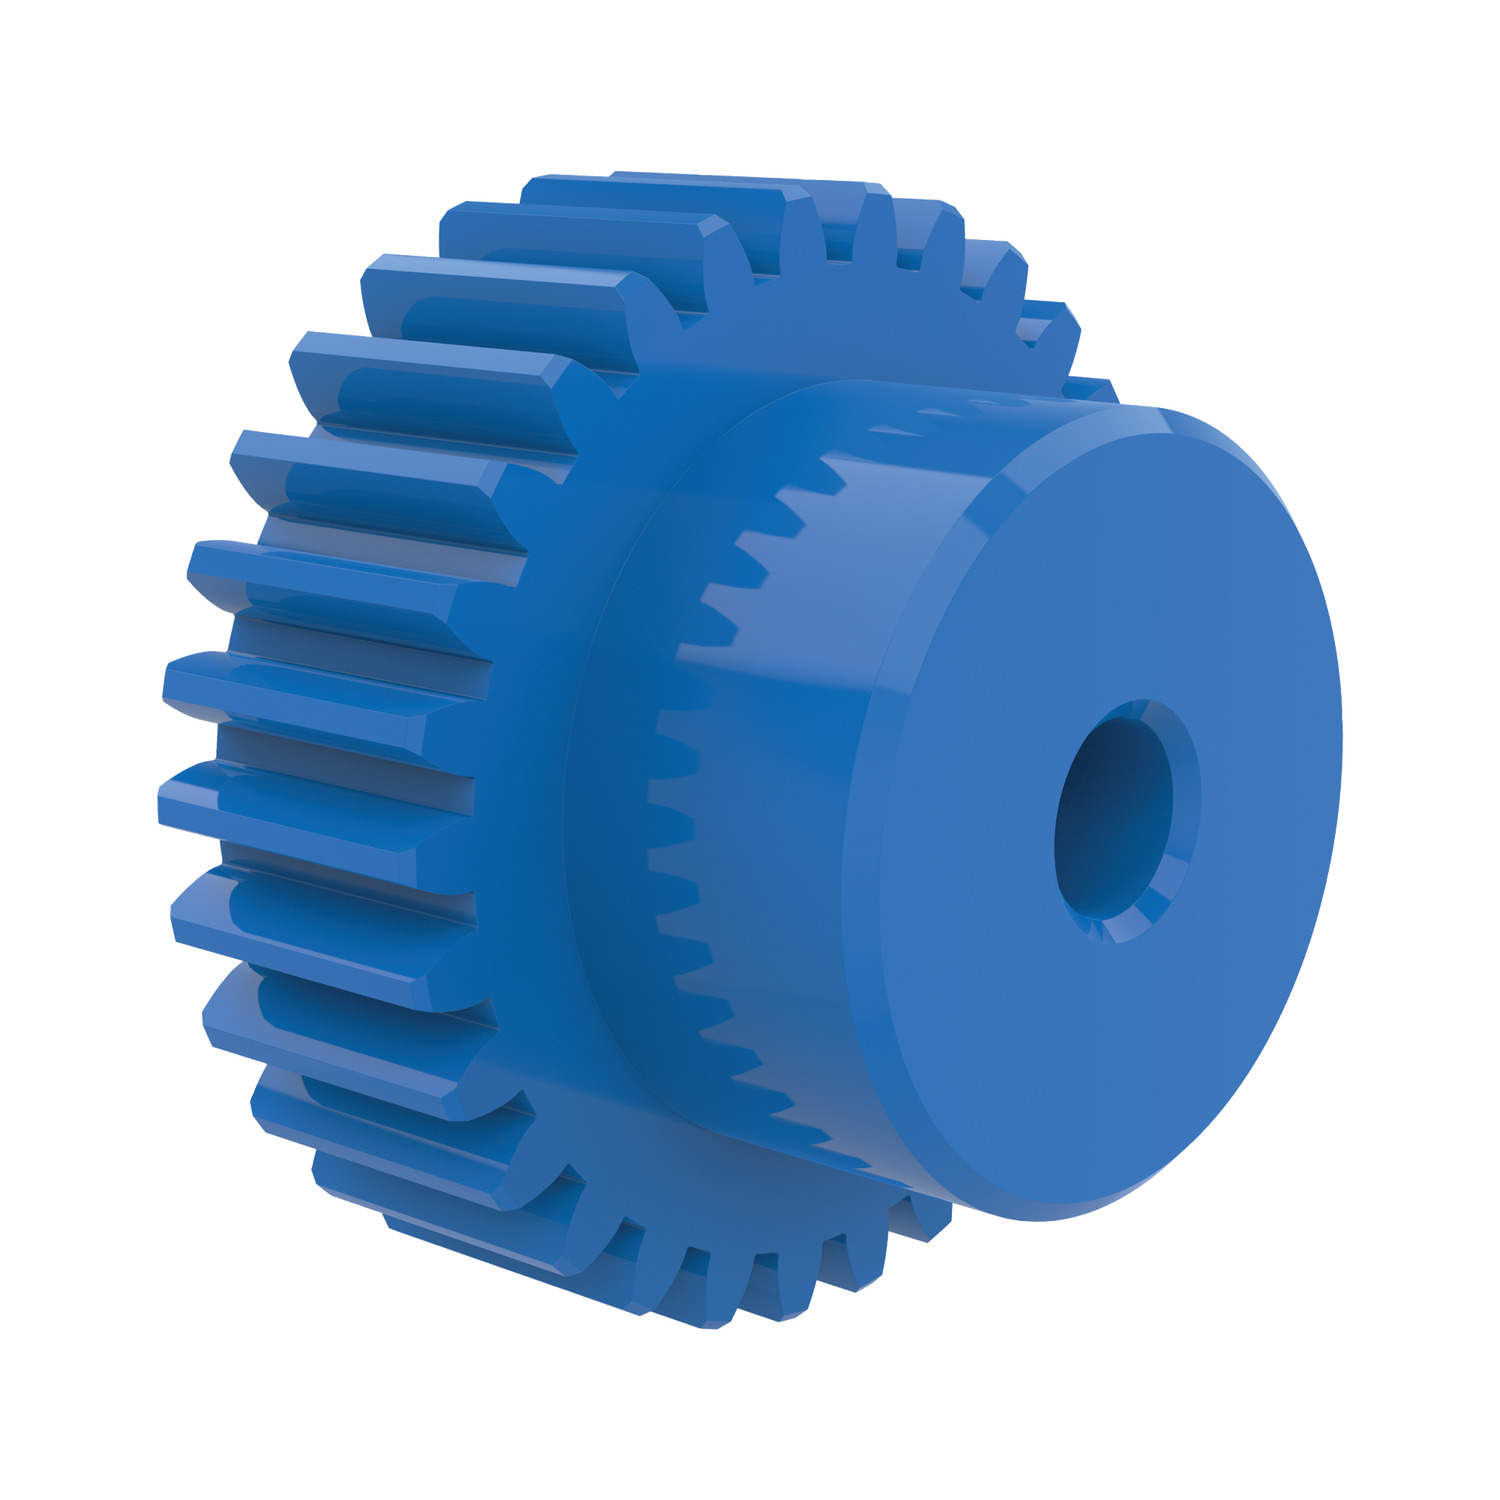 Automotion Components Spur Gears Technical Page